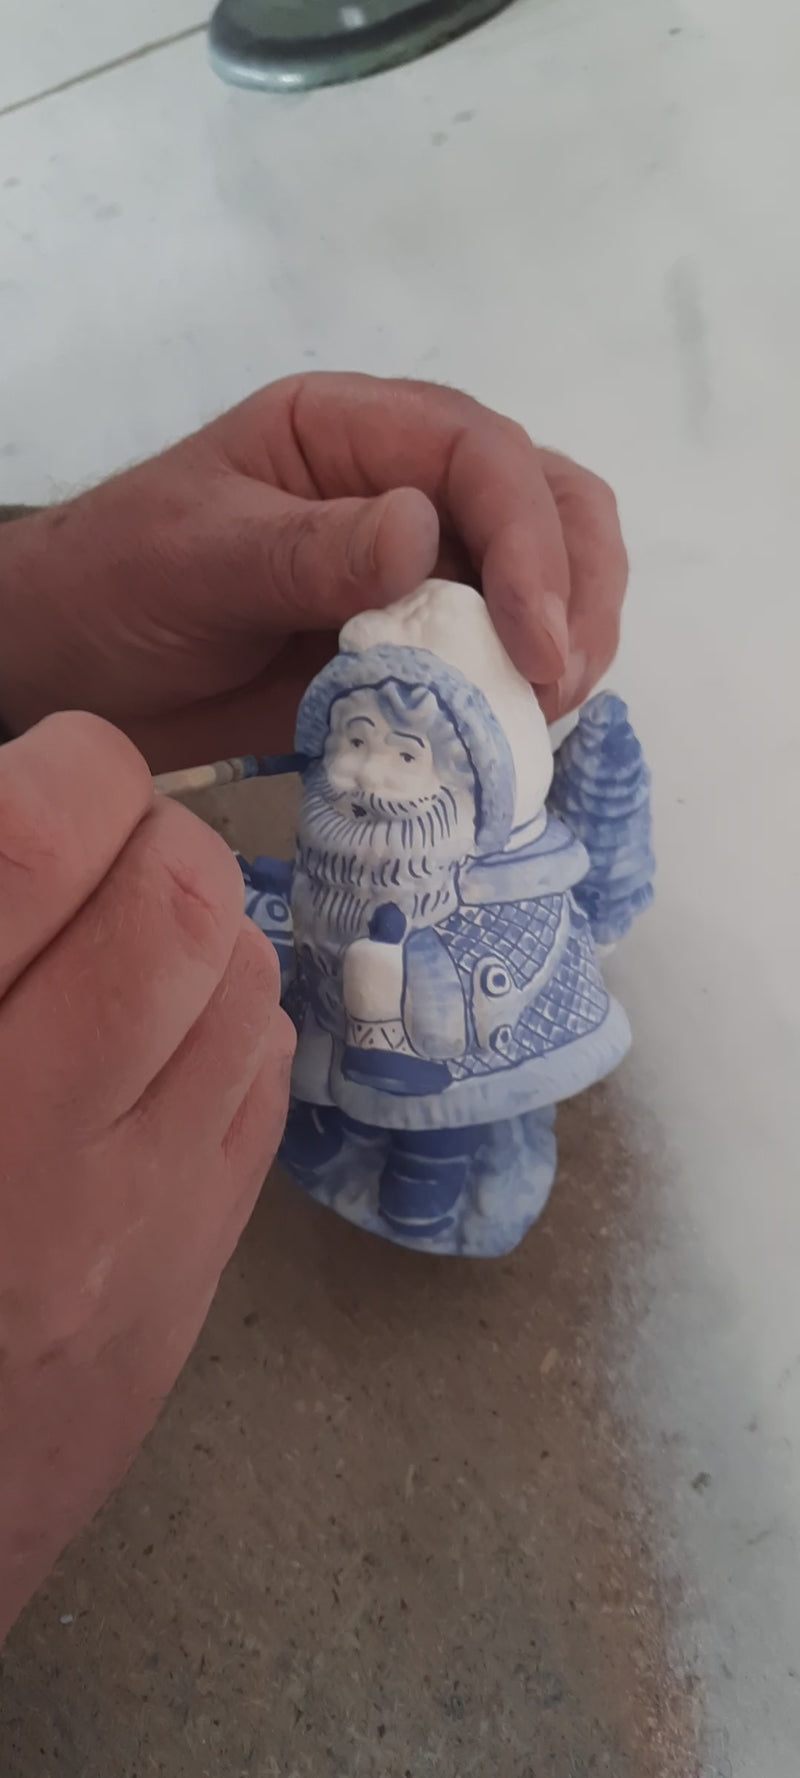 the painting is shown of a delftblue ceramic santa holding a train toy at Dutchceramics.